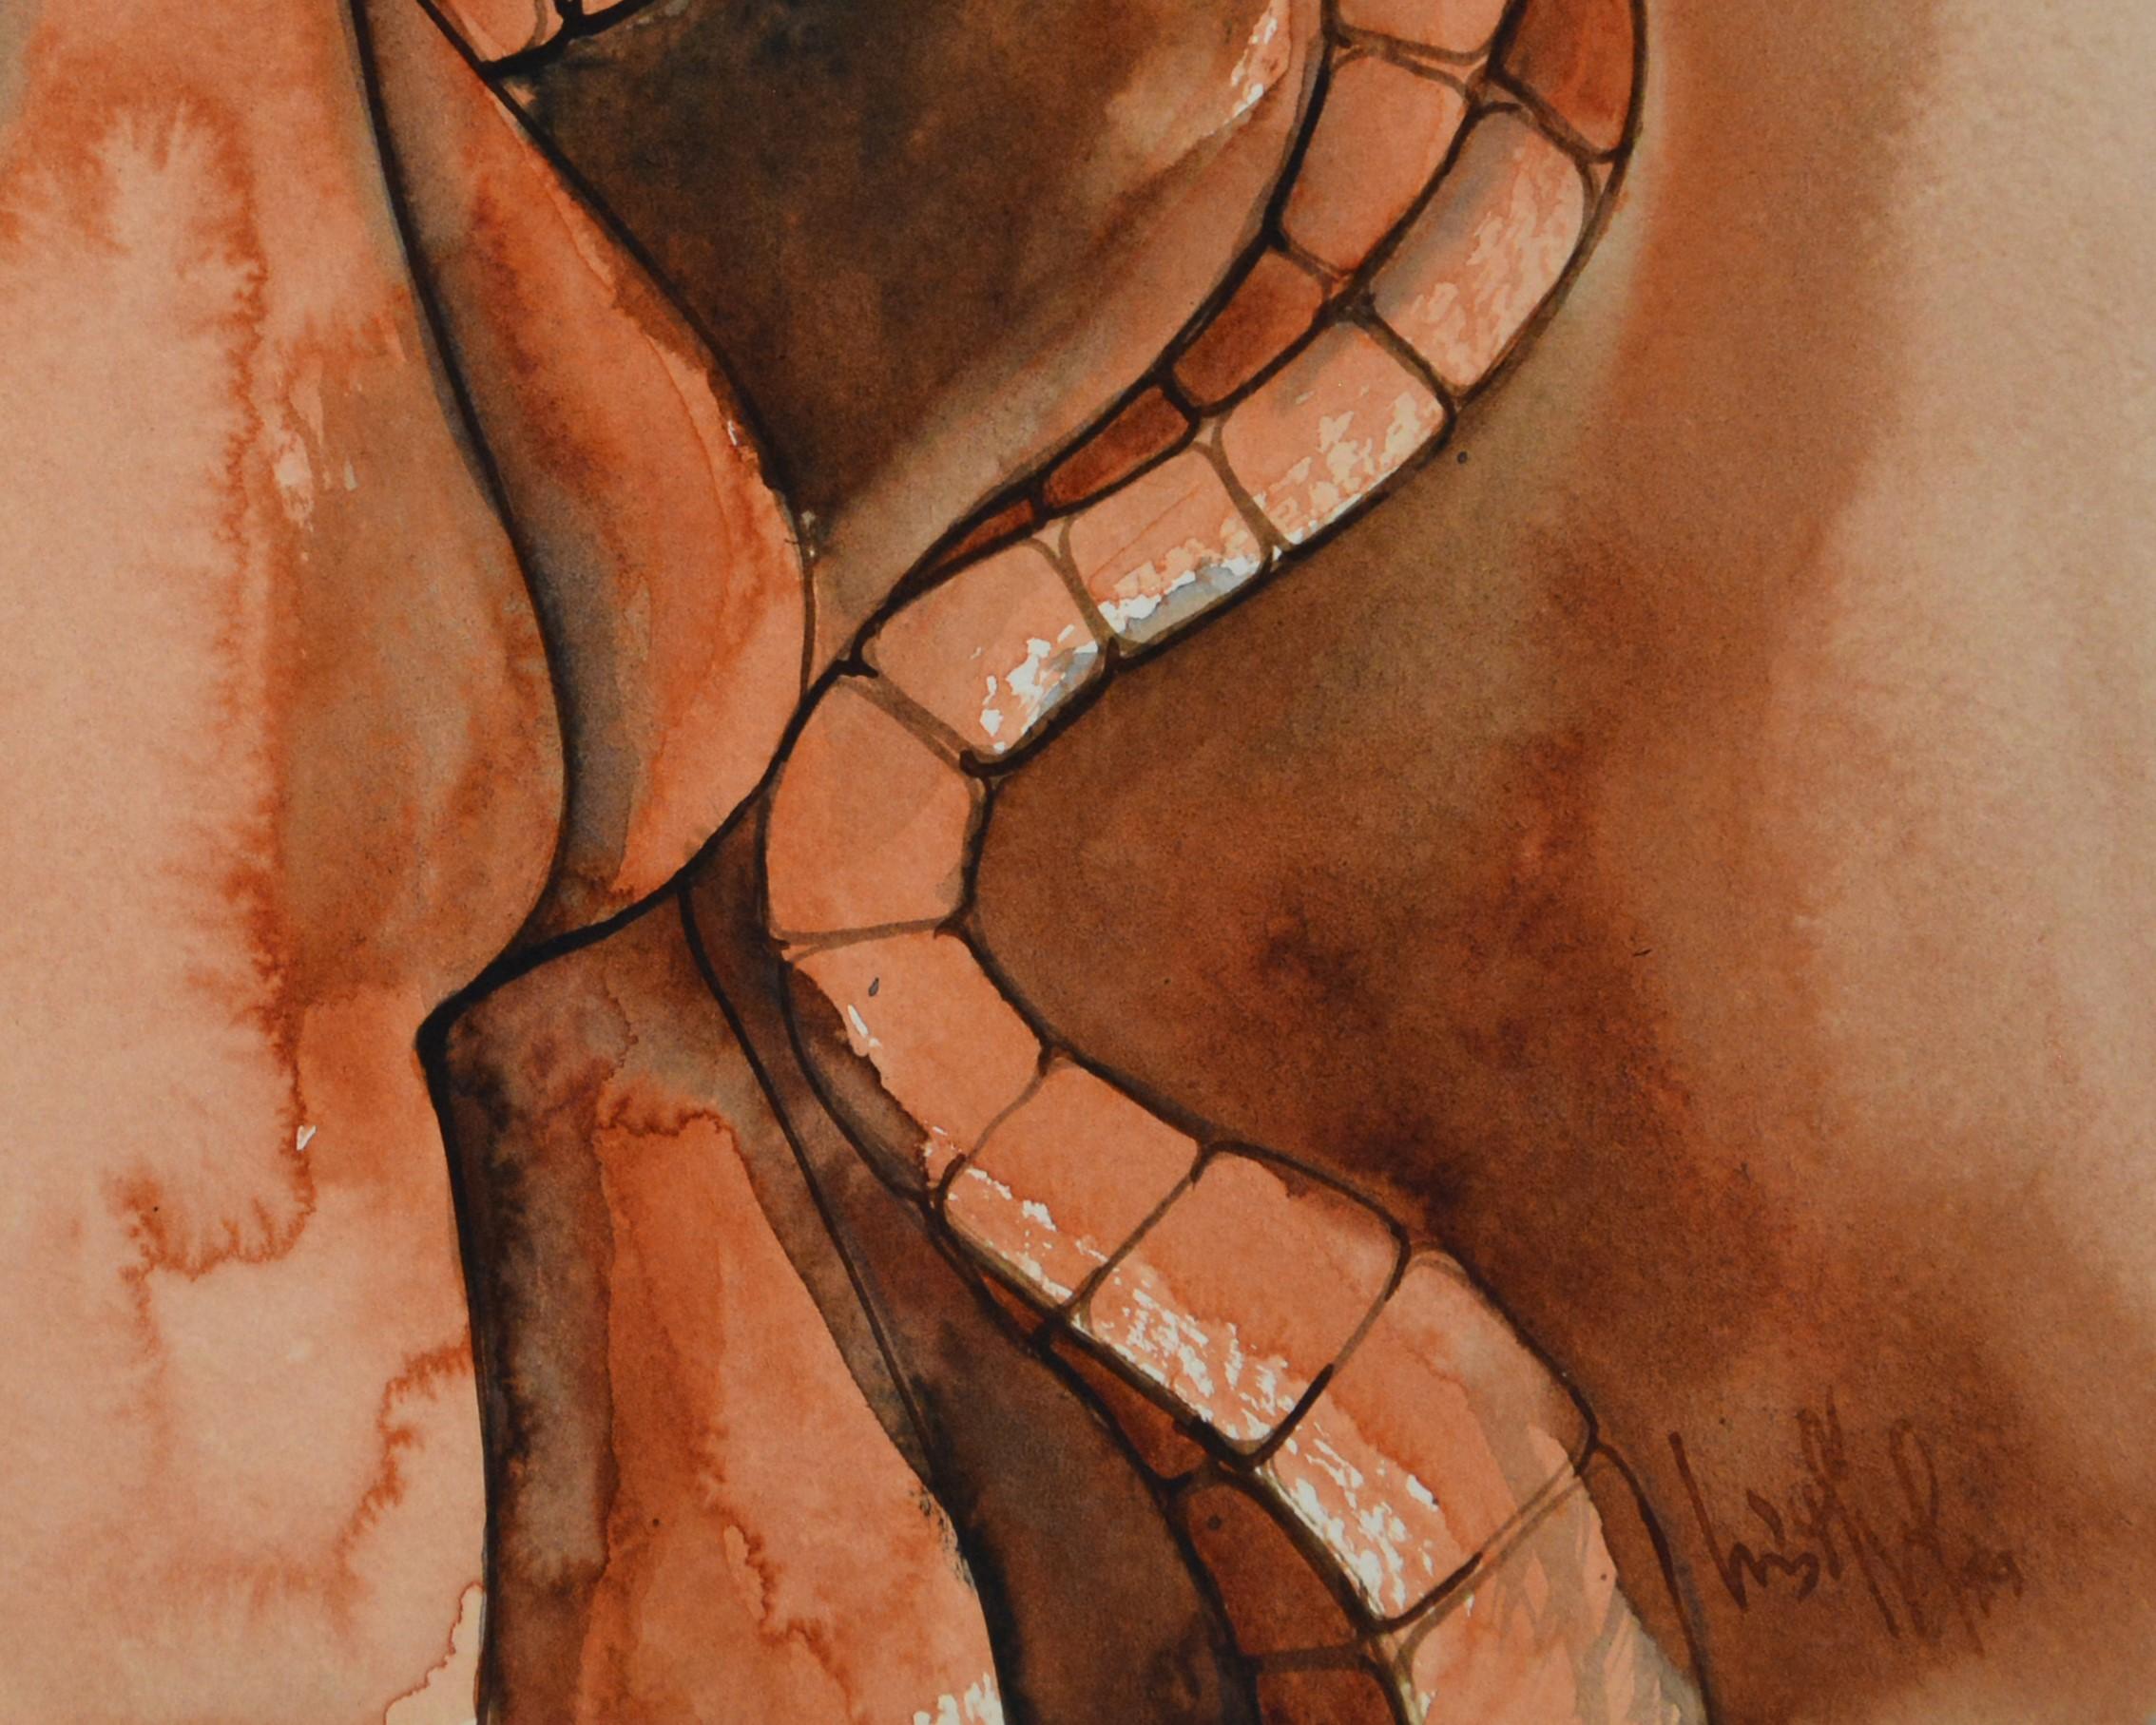 Luis Miguel Valdes, ¨Acueducto-1¨, 1999, Work on paper, 11.8x15.7 in - Contemporary Art by Luis Miguel Valdes 